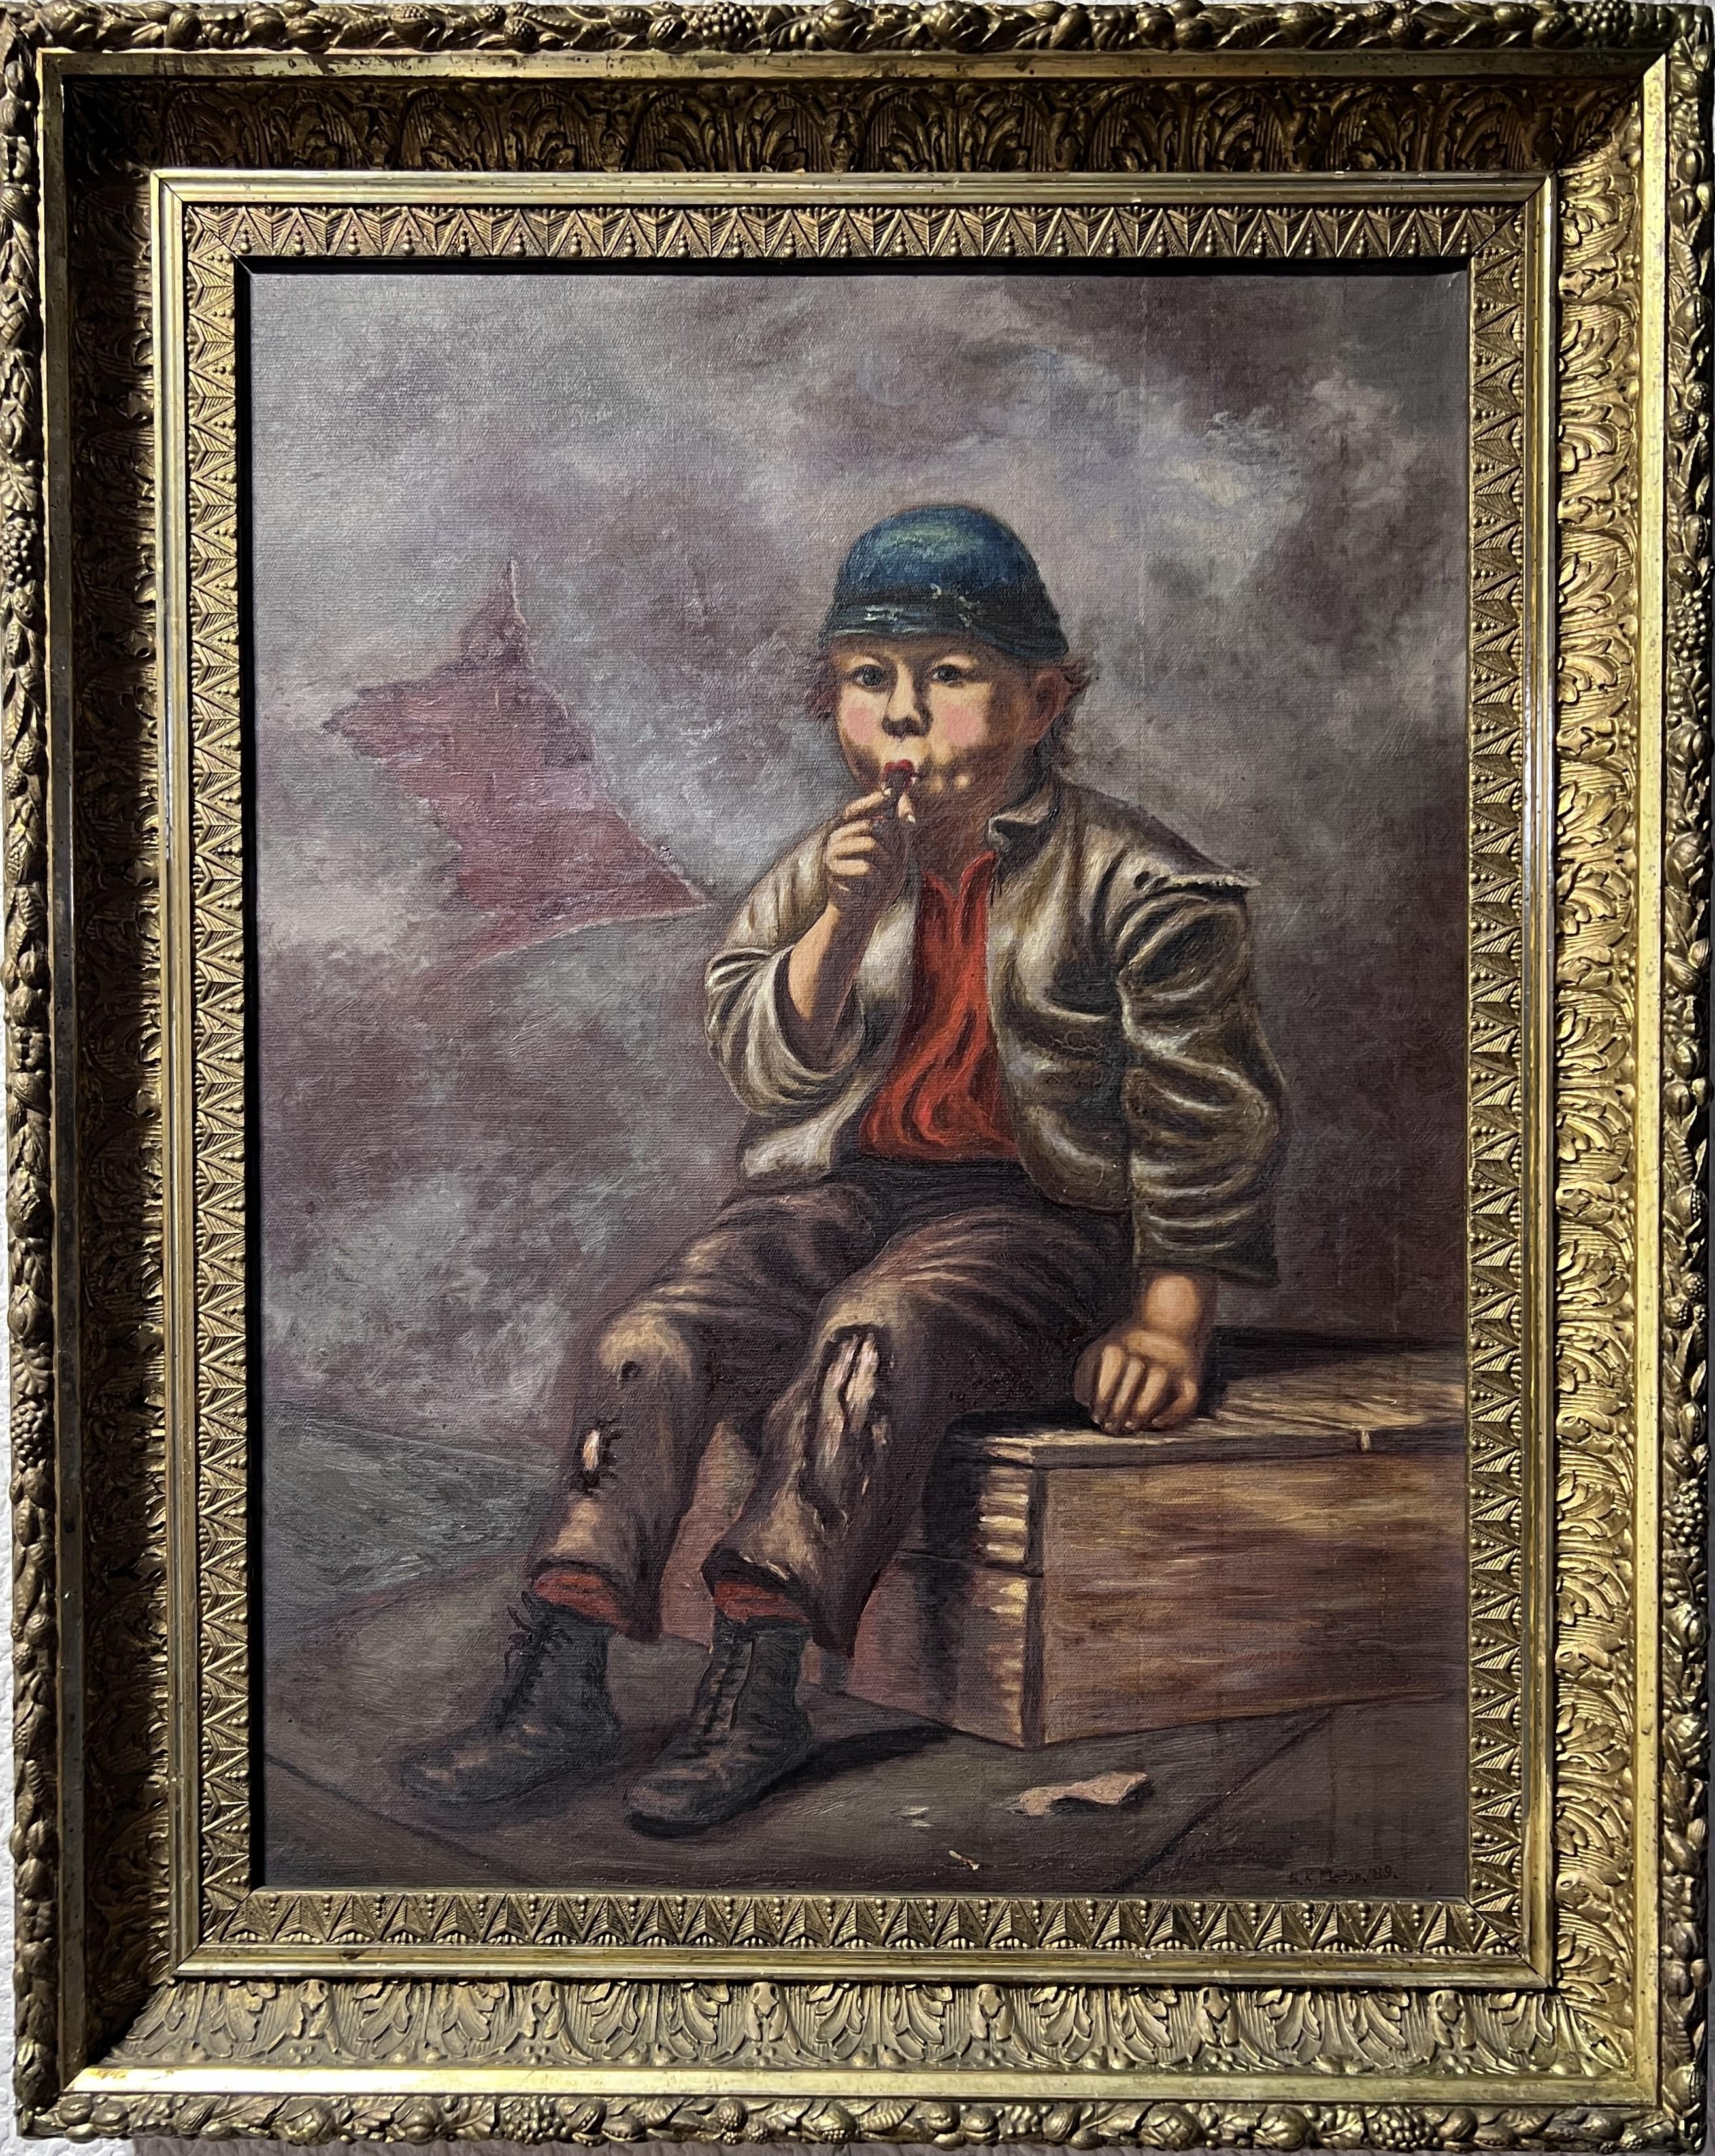 Unknown Portrait Painting - Original Vintage Oil Painting in canvas, Portrait of a Boy. Signed Dated, Framed